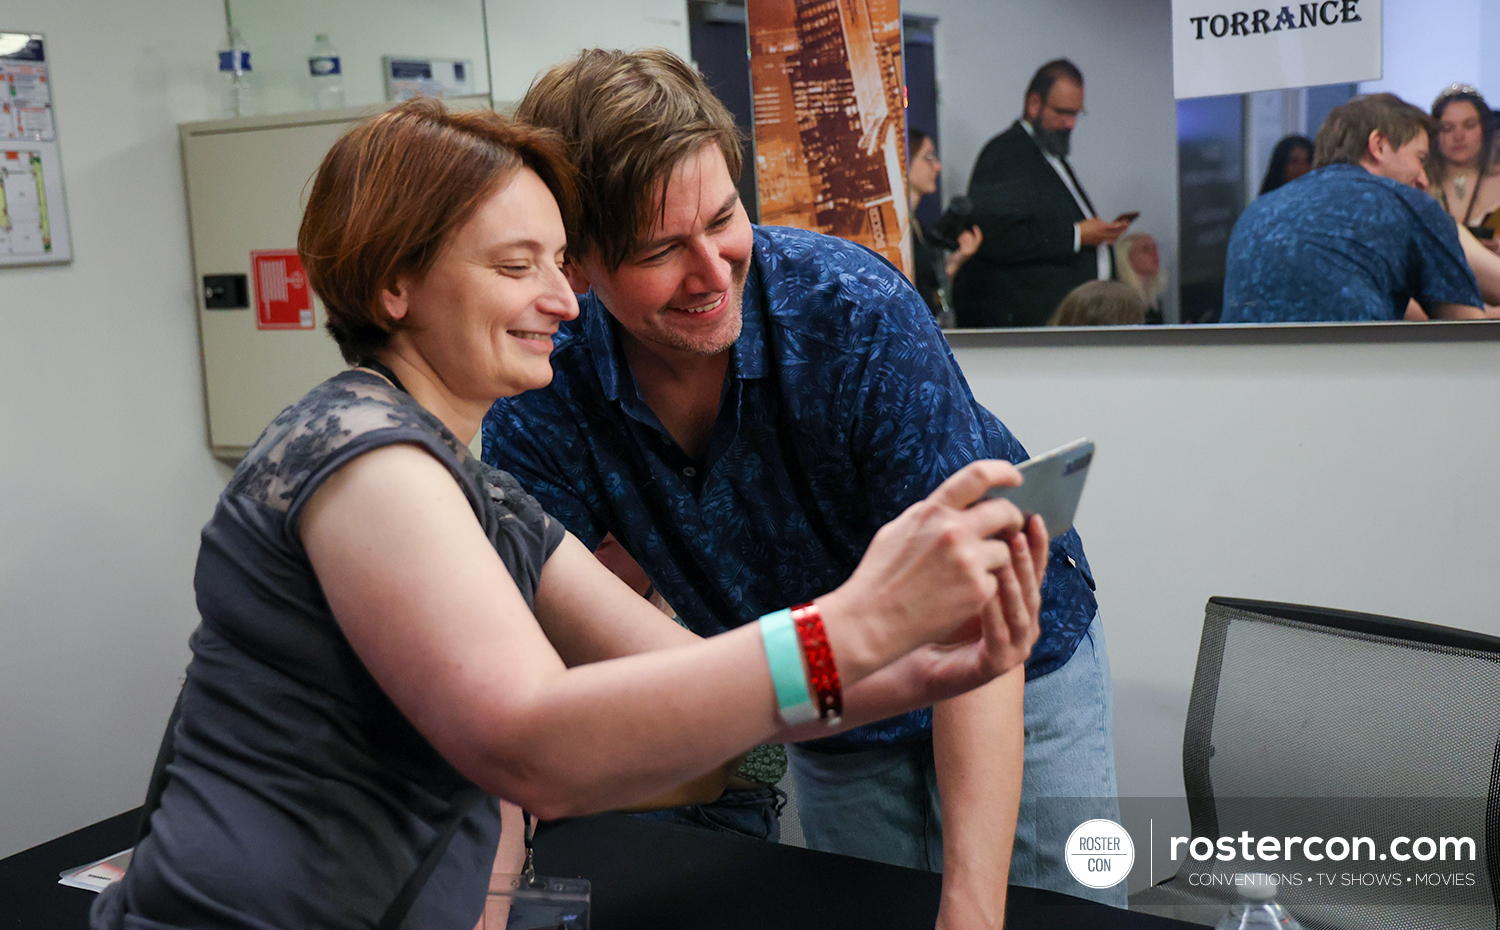 Autographes - Torrance Coombs - Long May She Reign 2 - Reign